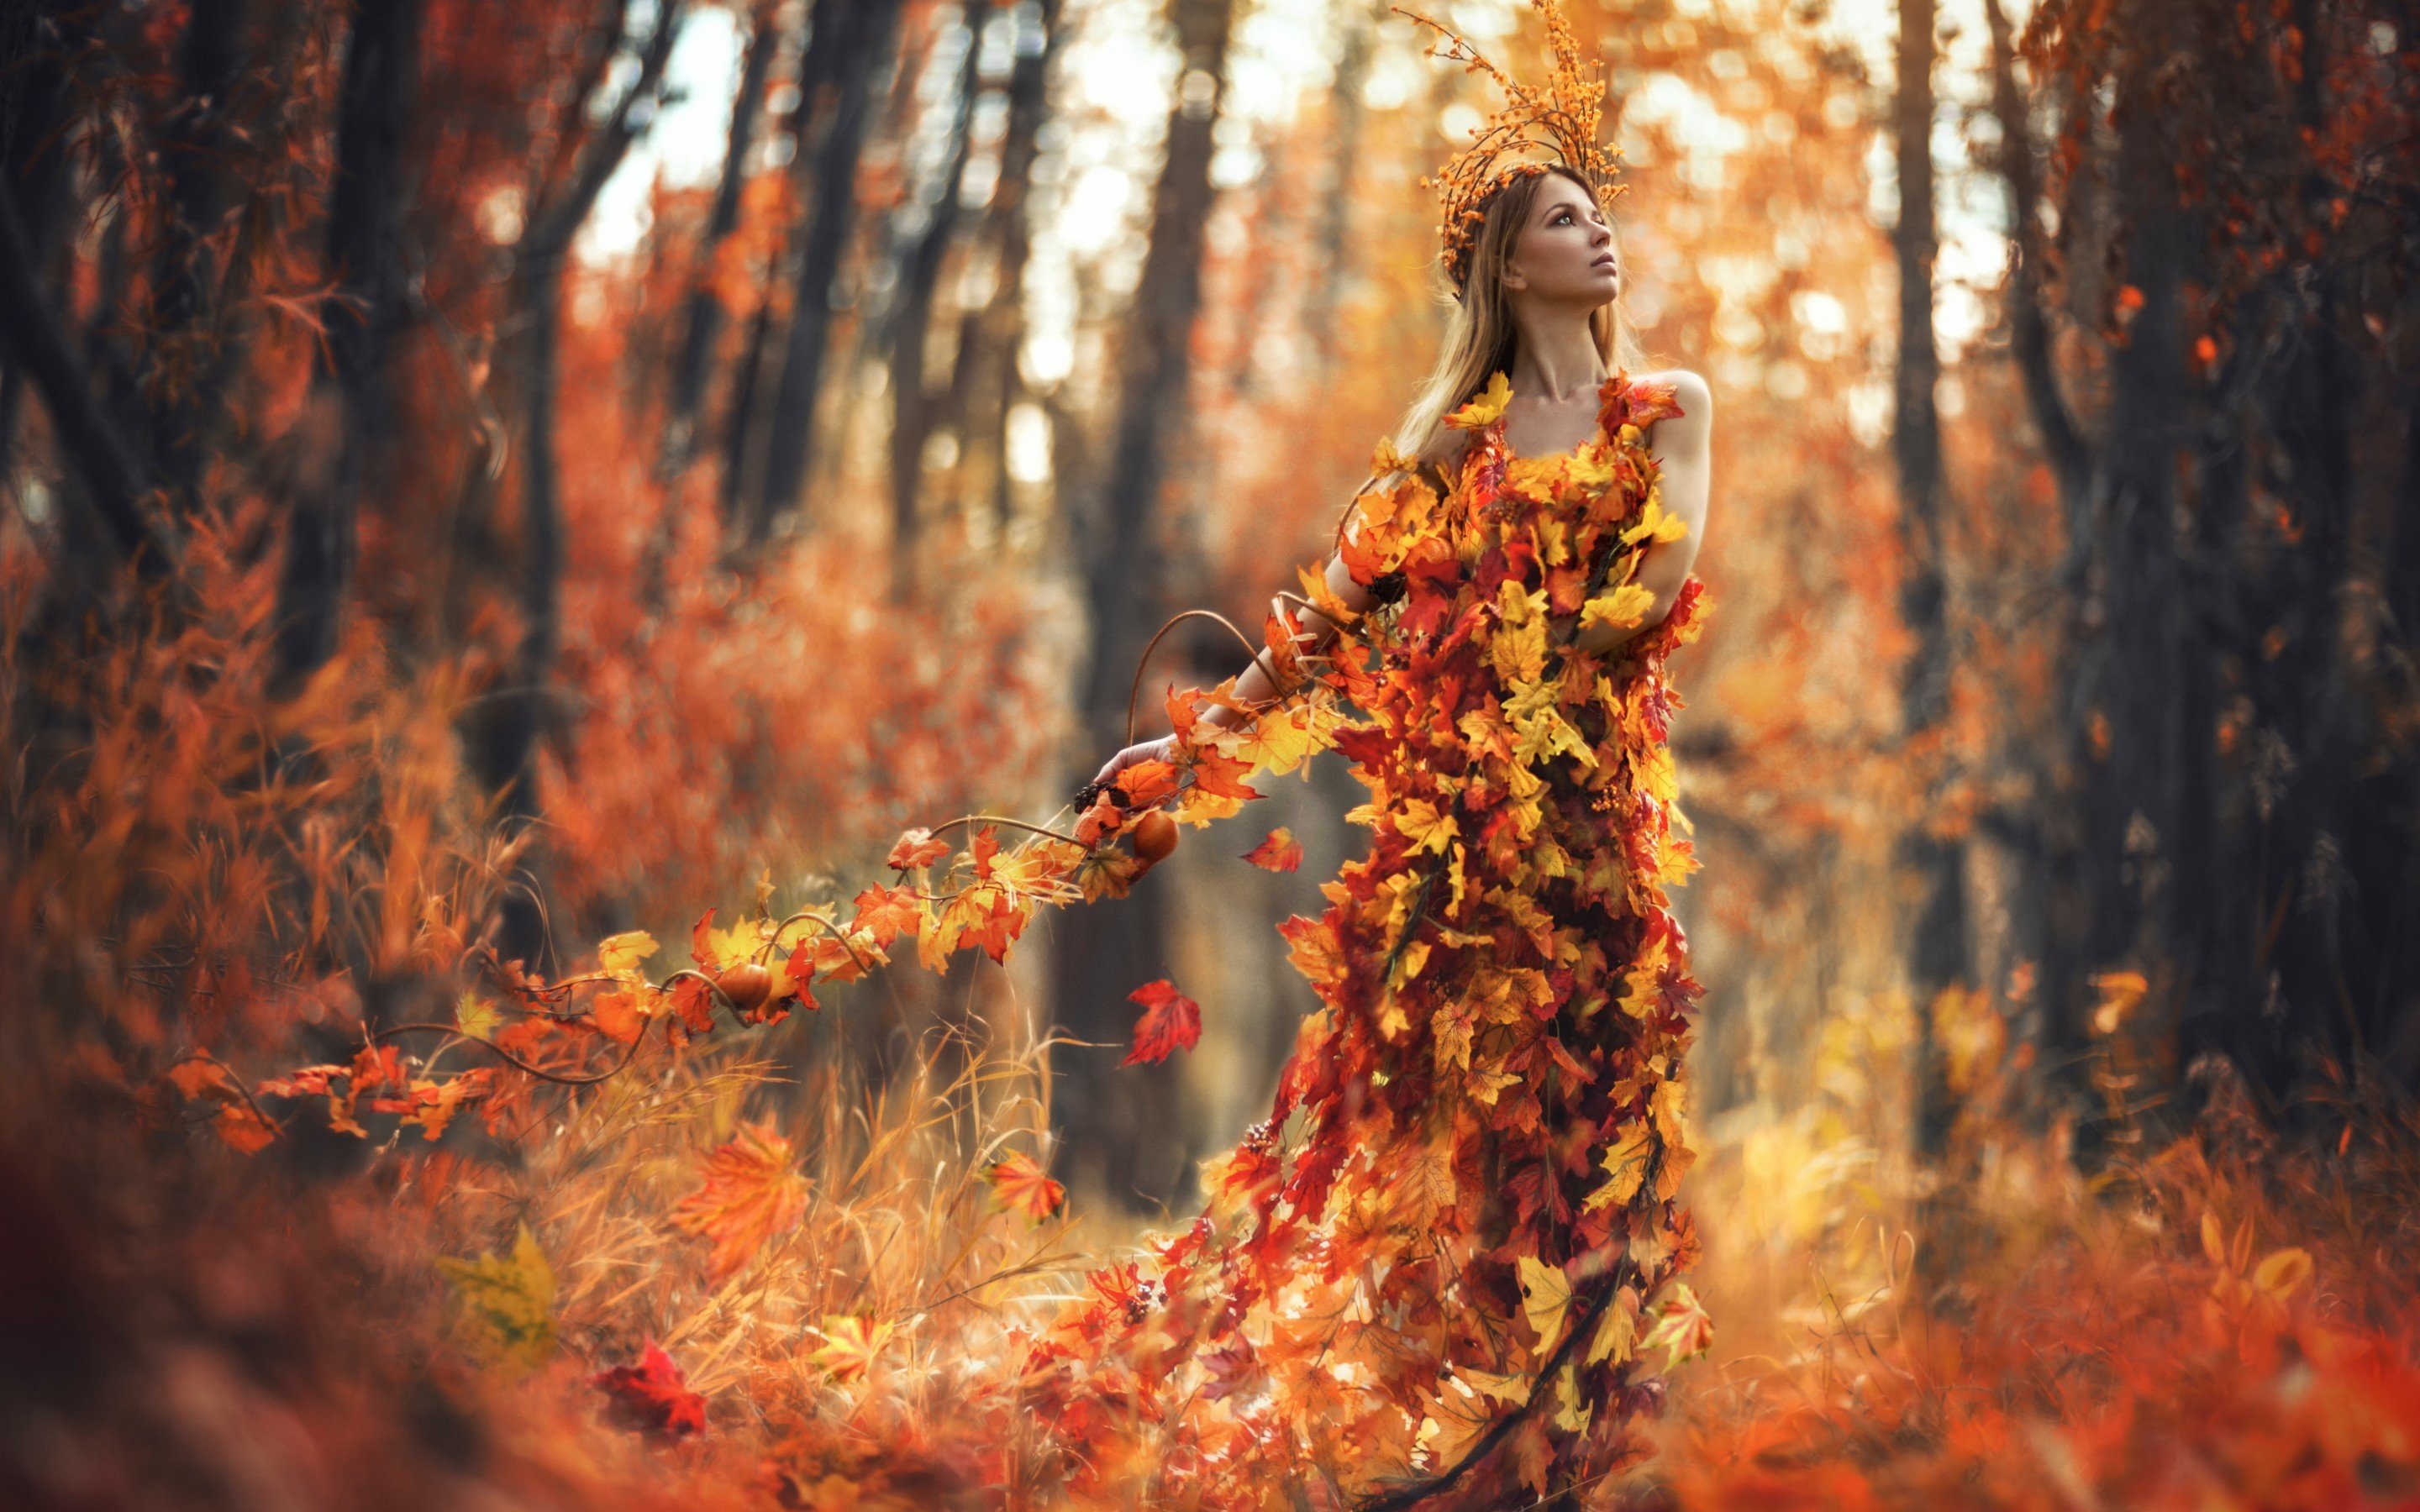 autumn, Fall, Landscape, Nature, Tree, Forest, Leaf, Leaves, Path, Trail, Mood, Women, Woman, Fantasy, Female, Girl Wallpaper